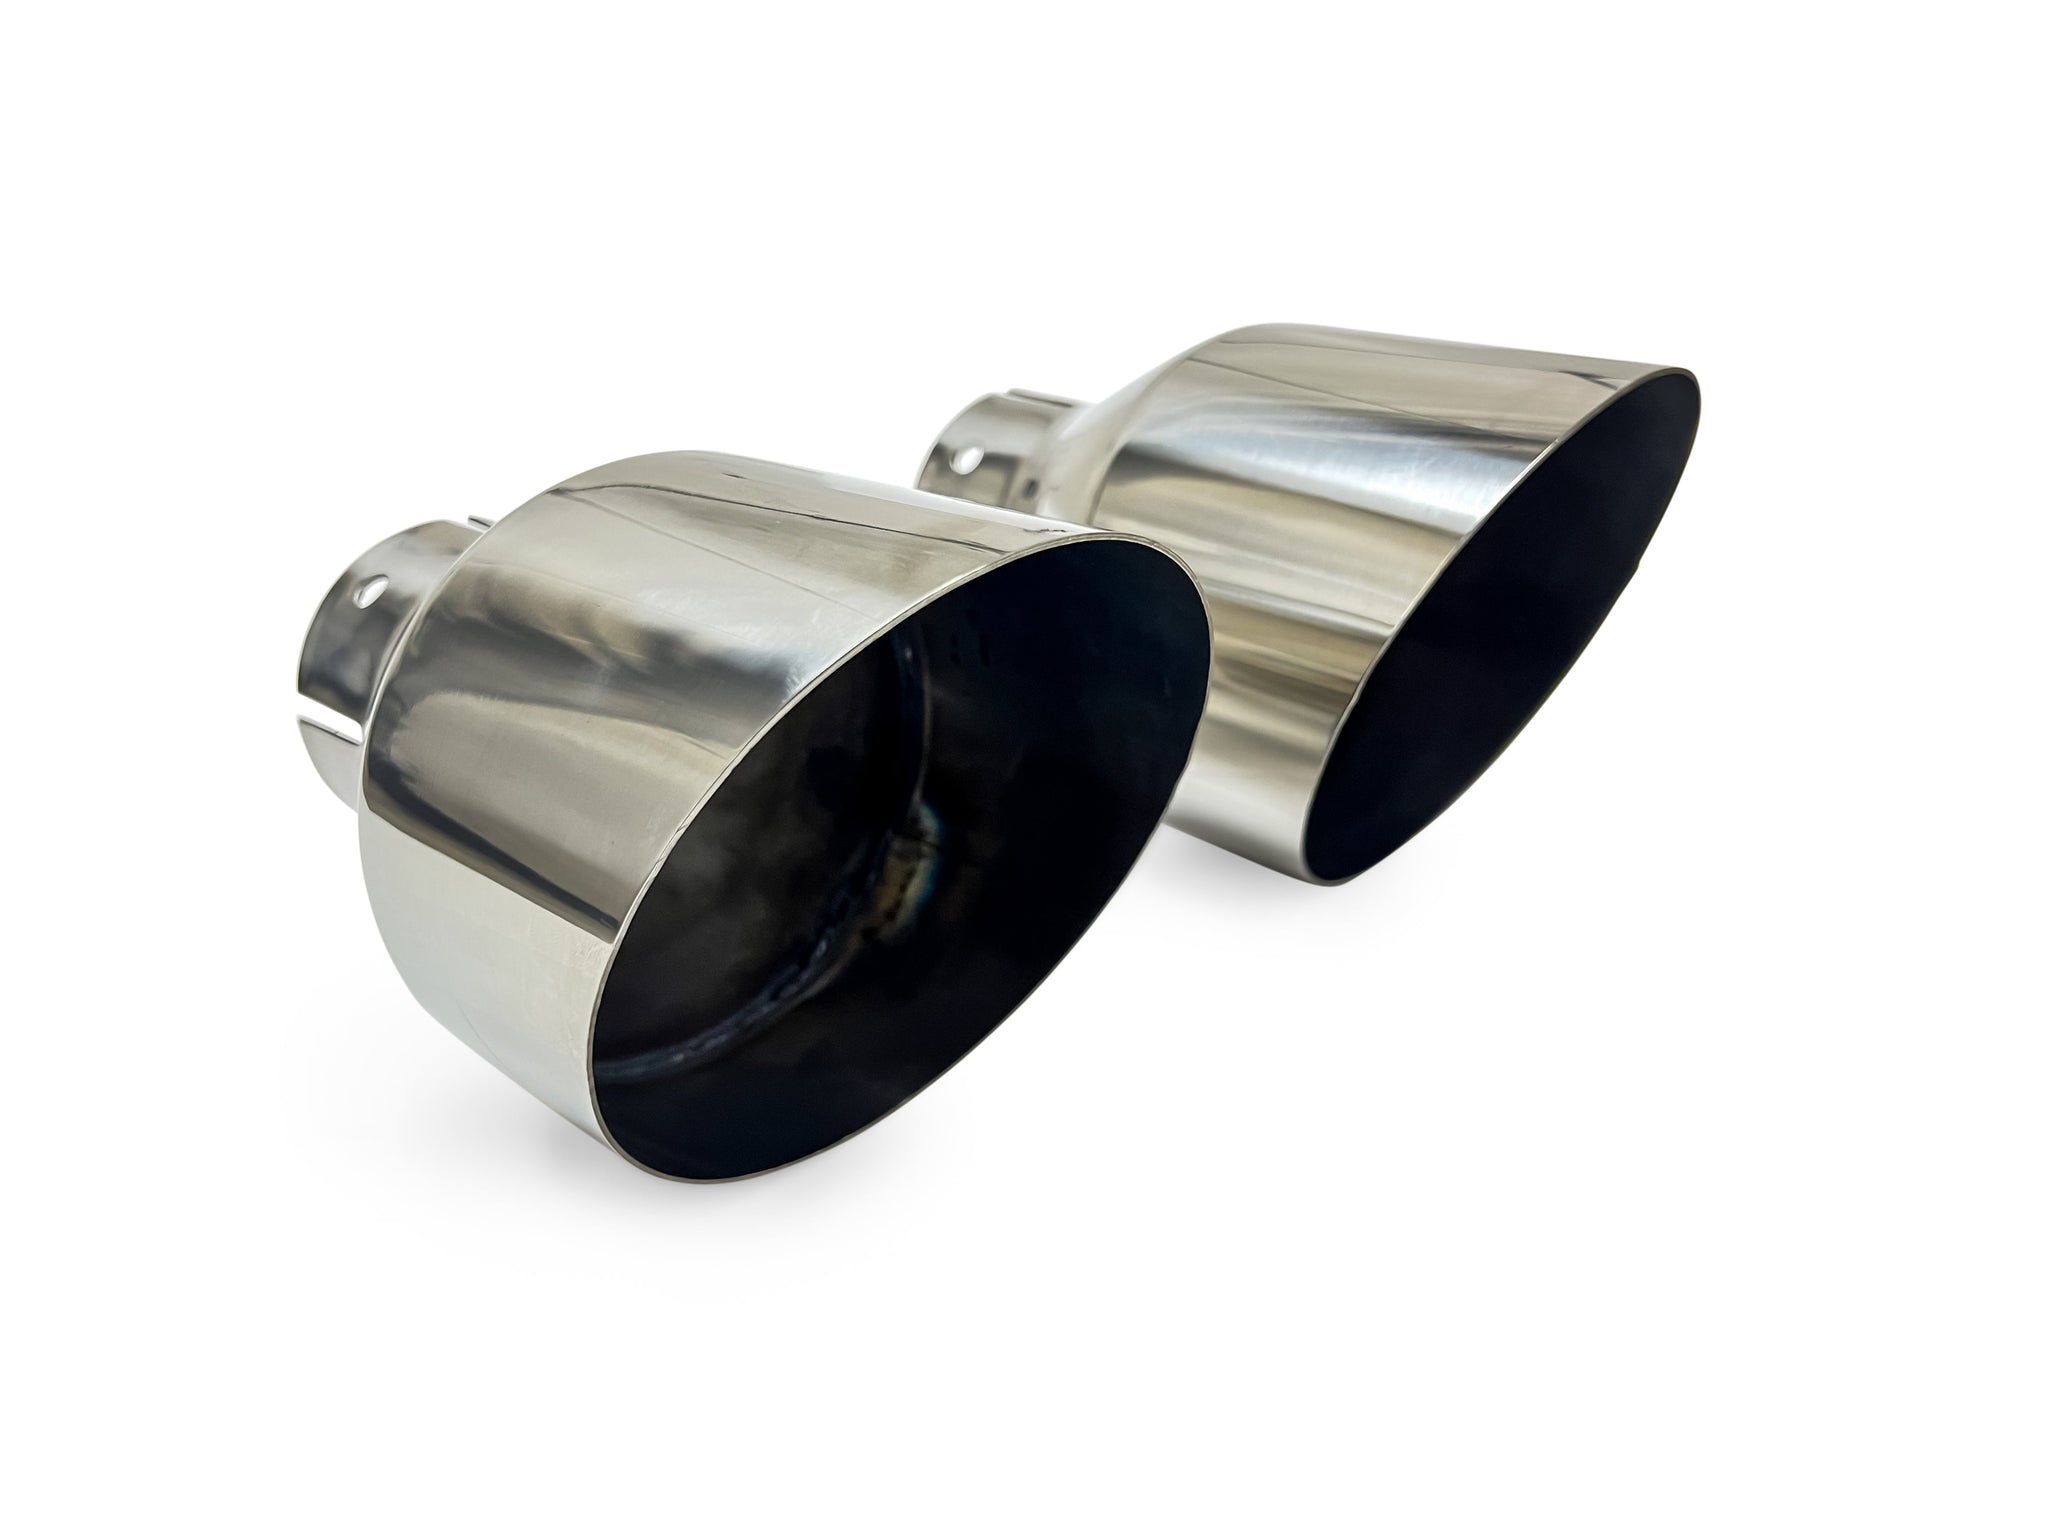 KIA Cerato GT IFX 4½ Inch Single Skinned Exhaust Tips - Pair